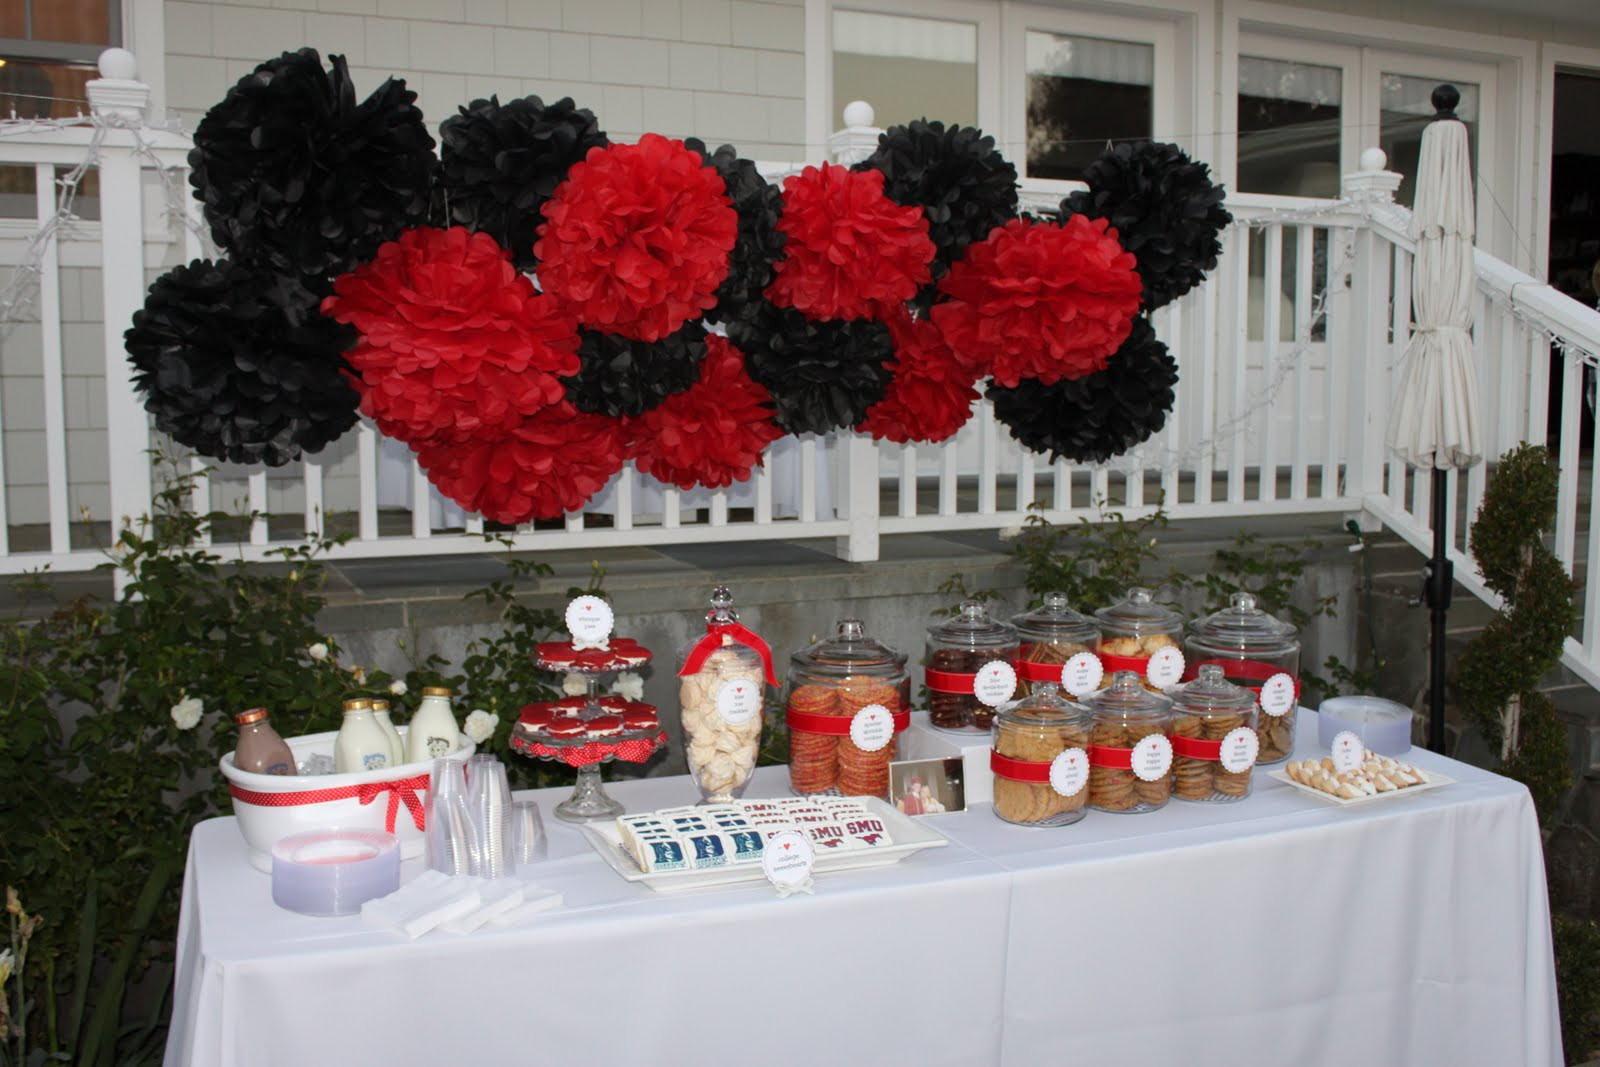 Ideas For A Engagement Party
 Nicole s Guide To Style Engagement Party Decor